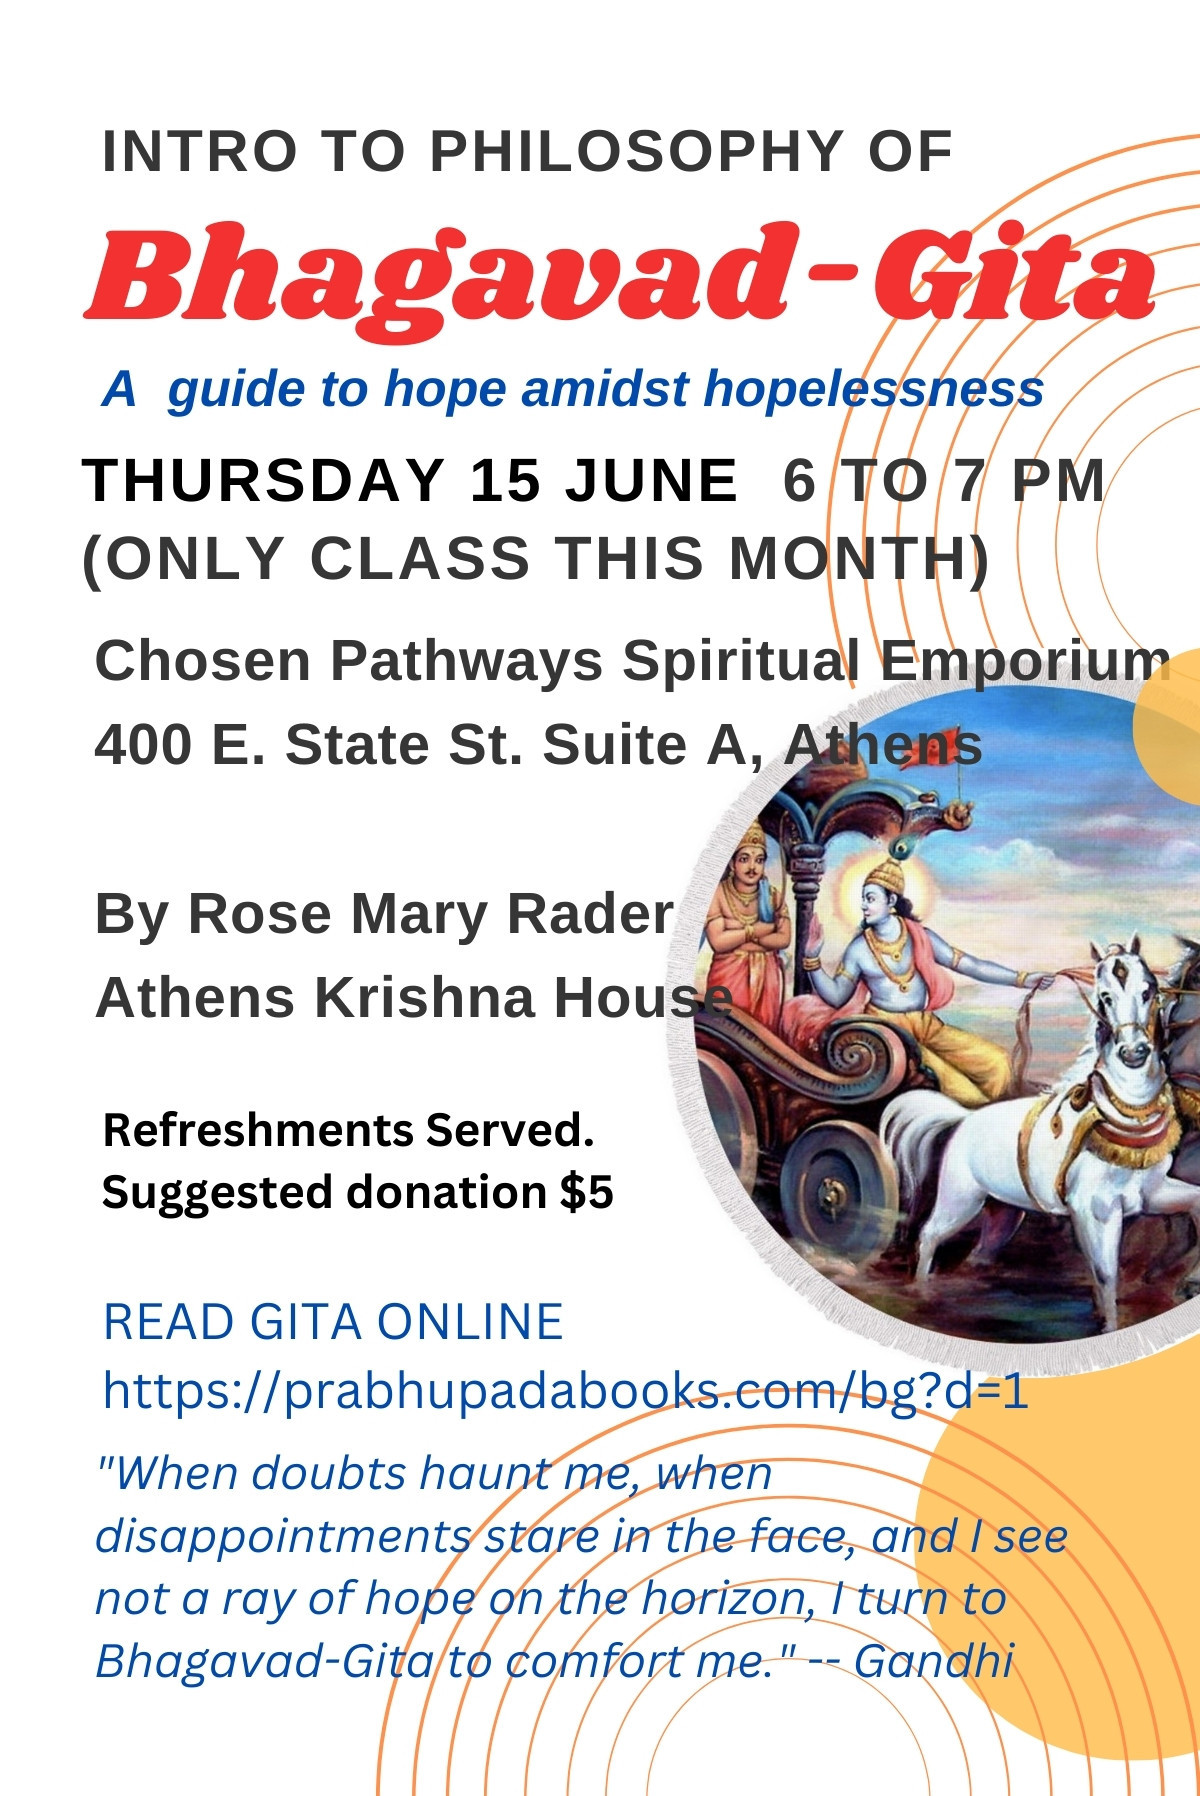 A flyer for the upcoming Intro to the Bhagavad-Gita workshop. The information on the flyer is detailed in the event listing.